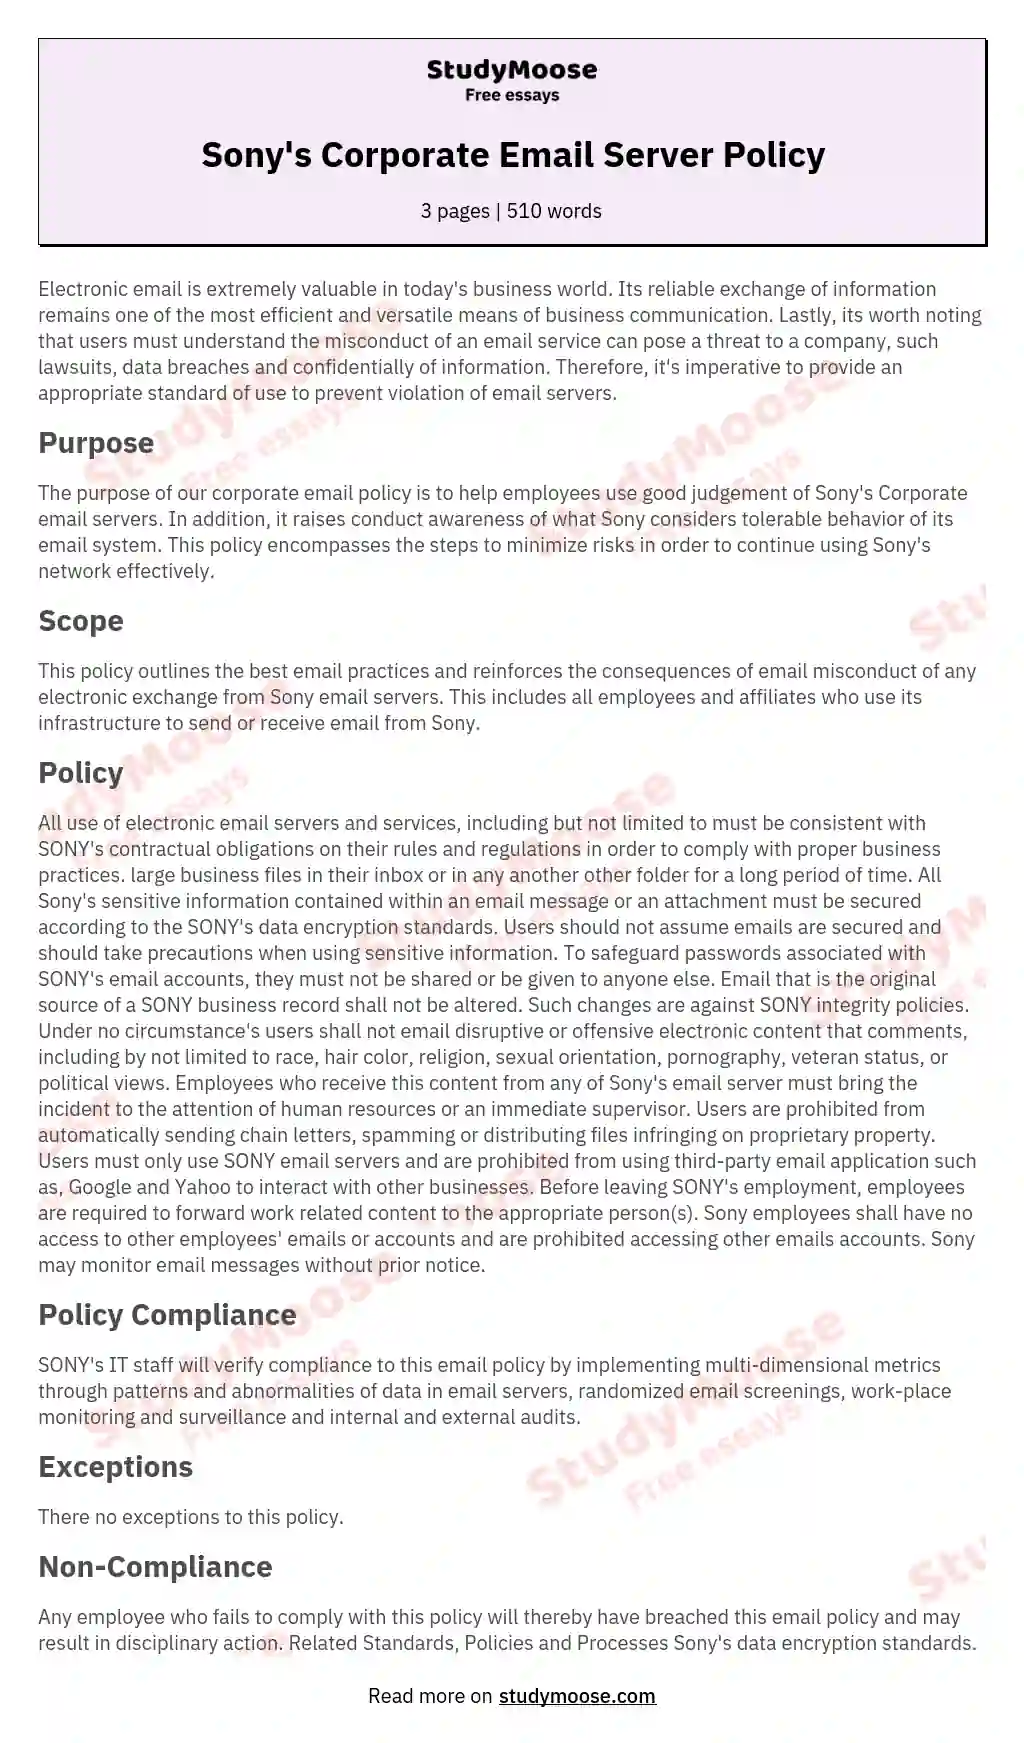 Sony's Corporate Email Server Policy essay